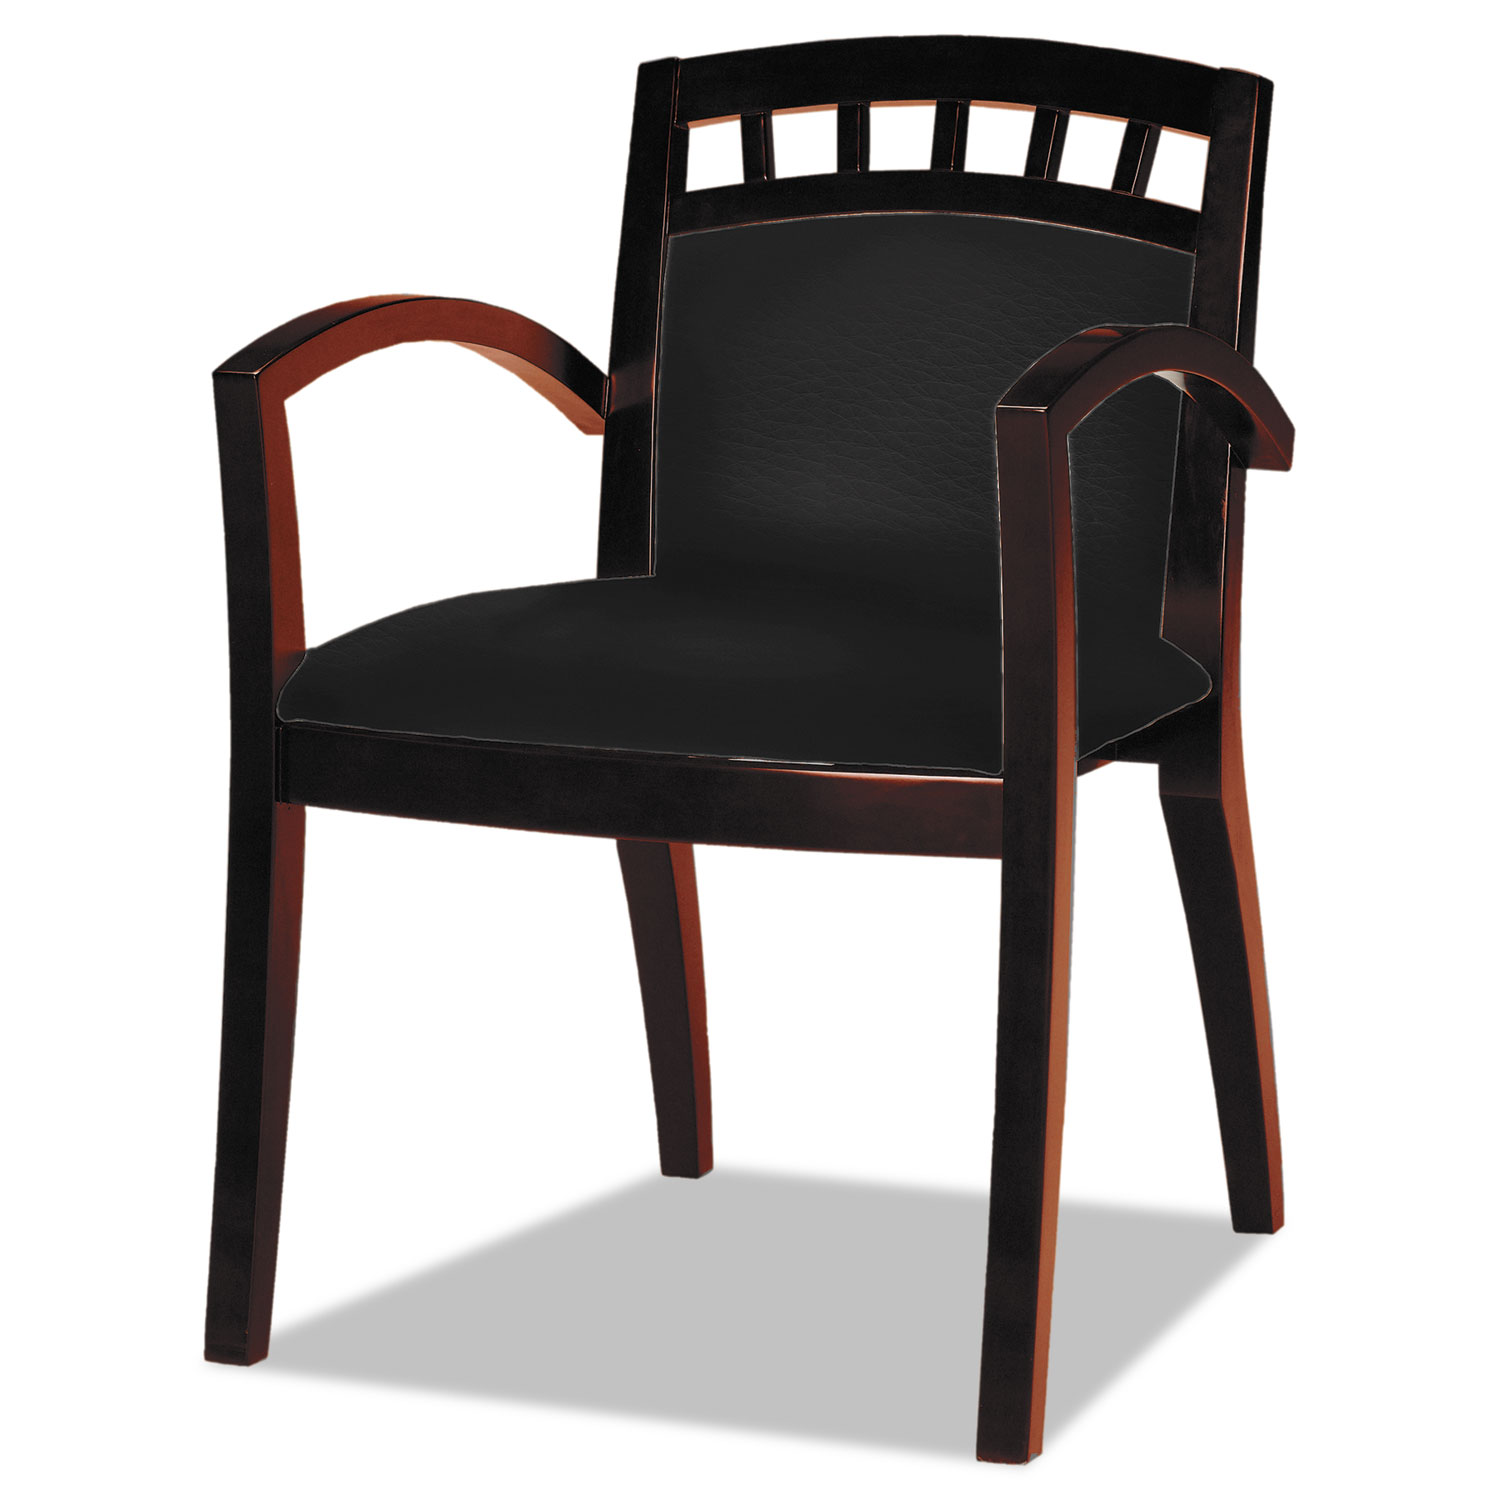 Mercado Series Arch-Back Wood Guest Chair, Mahogany/Black Leather